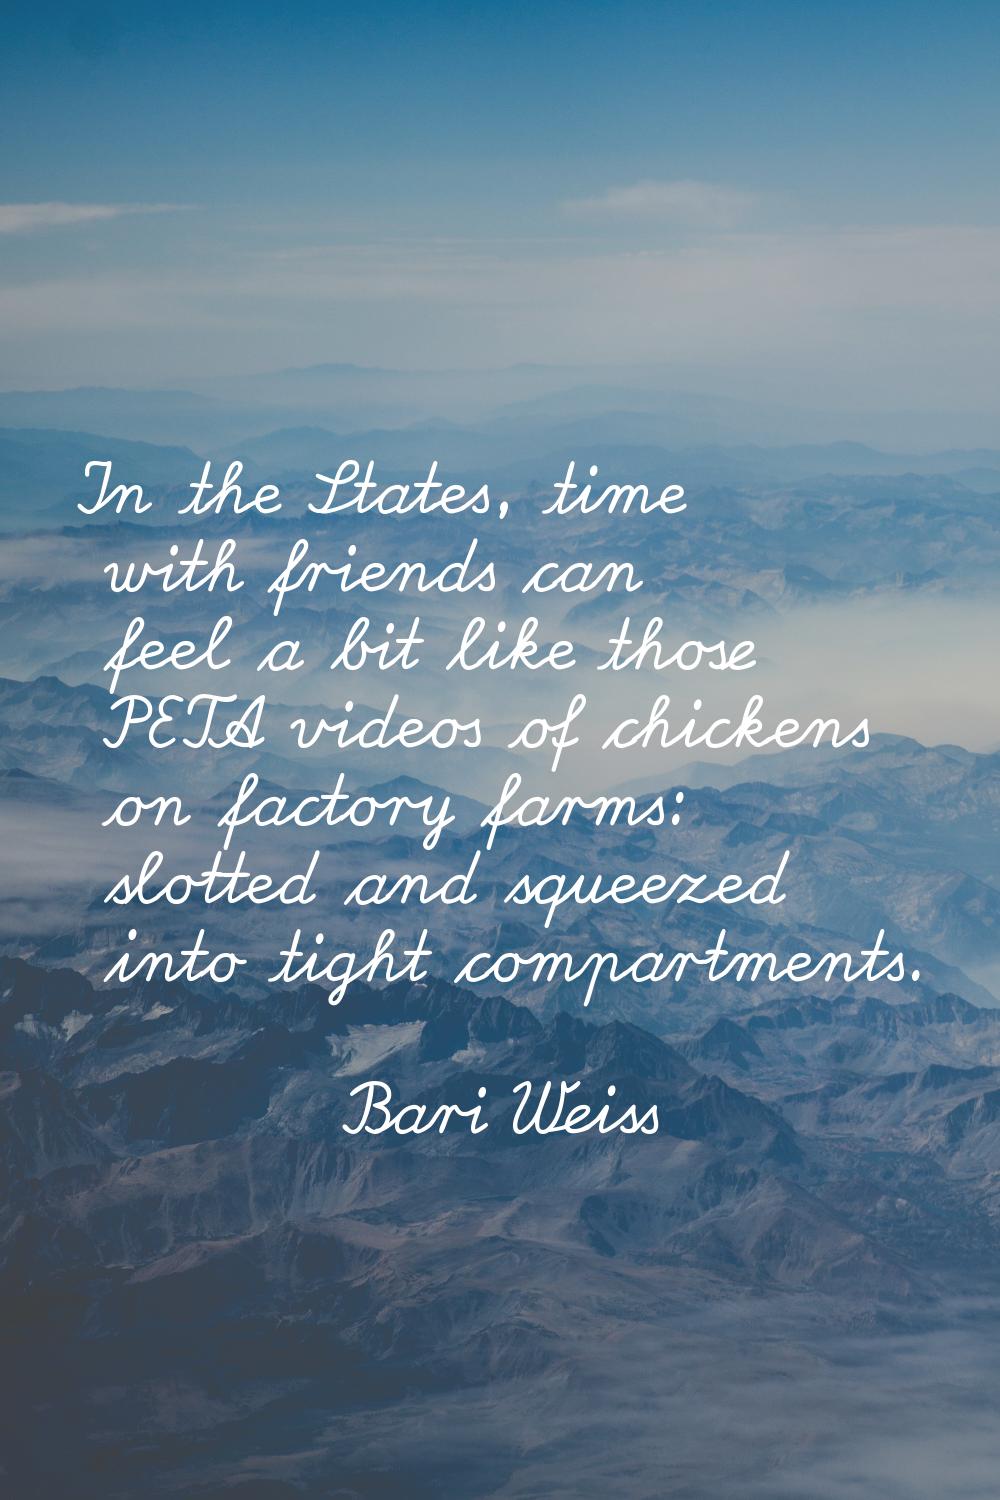 In the States, time with friends can feel a bit like those PETA videos of chickens on factory farms